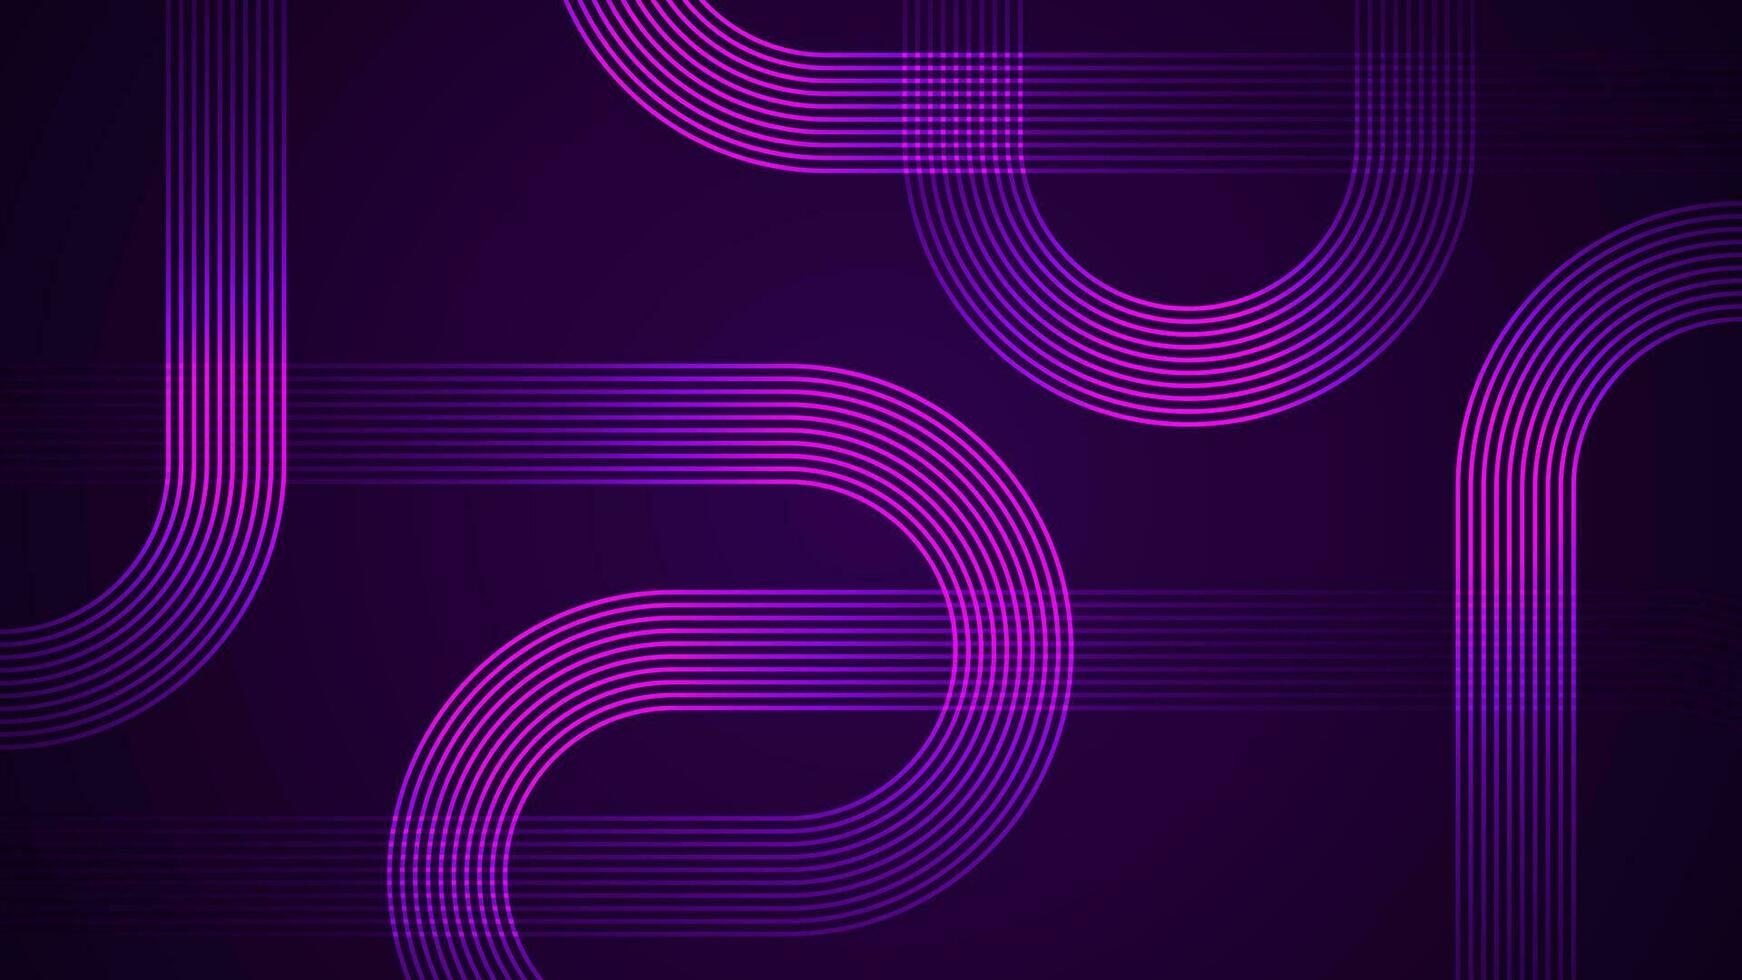 Dark violet abstract background with serpentine style lines as the main component. vector